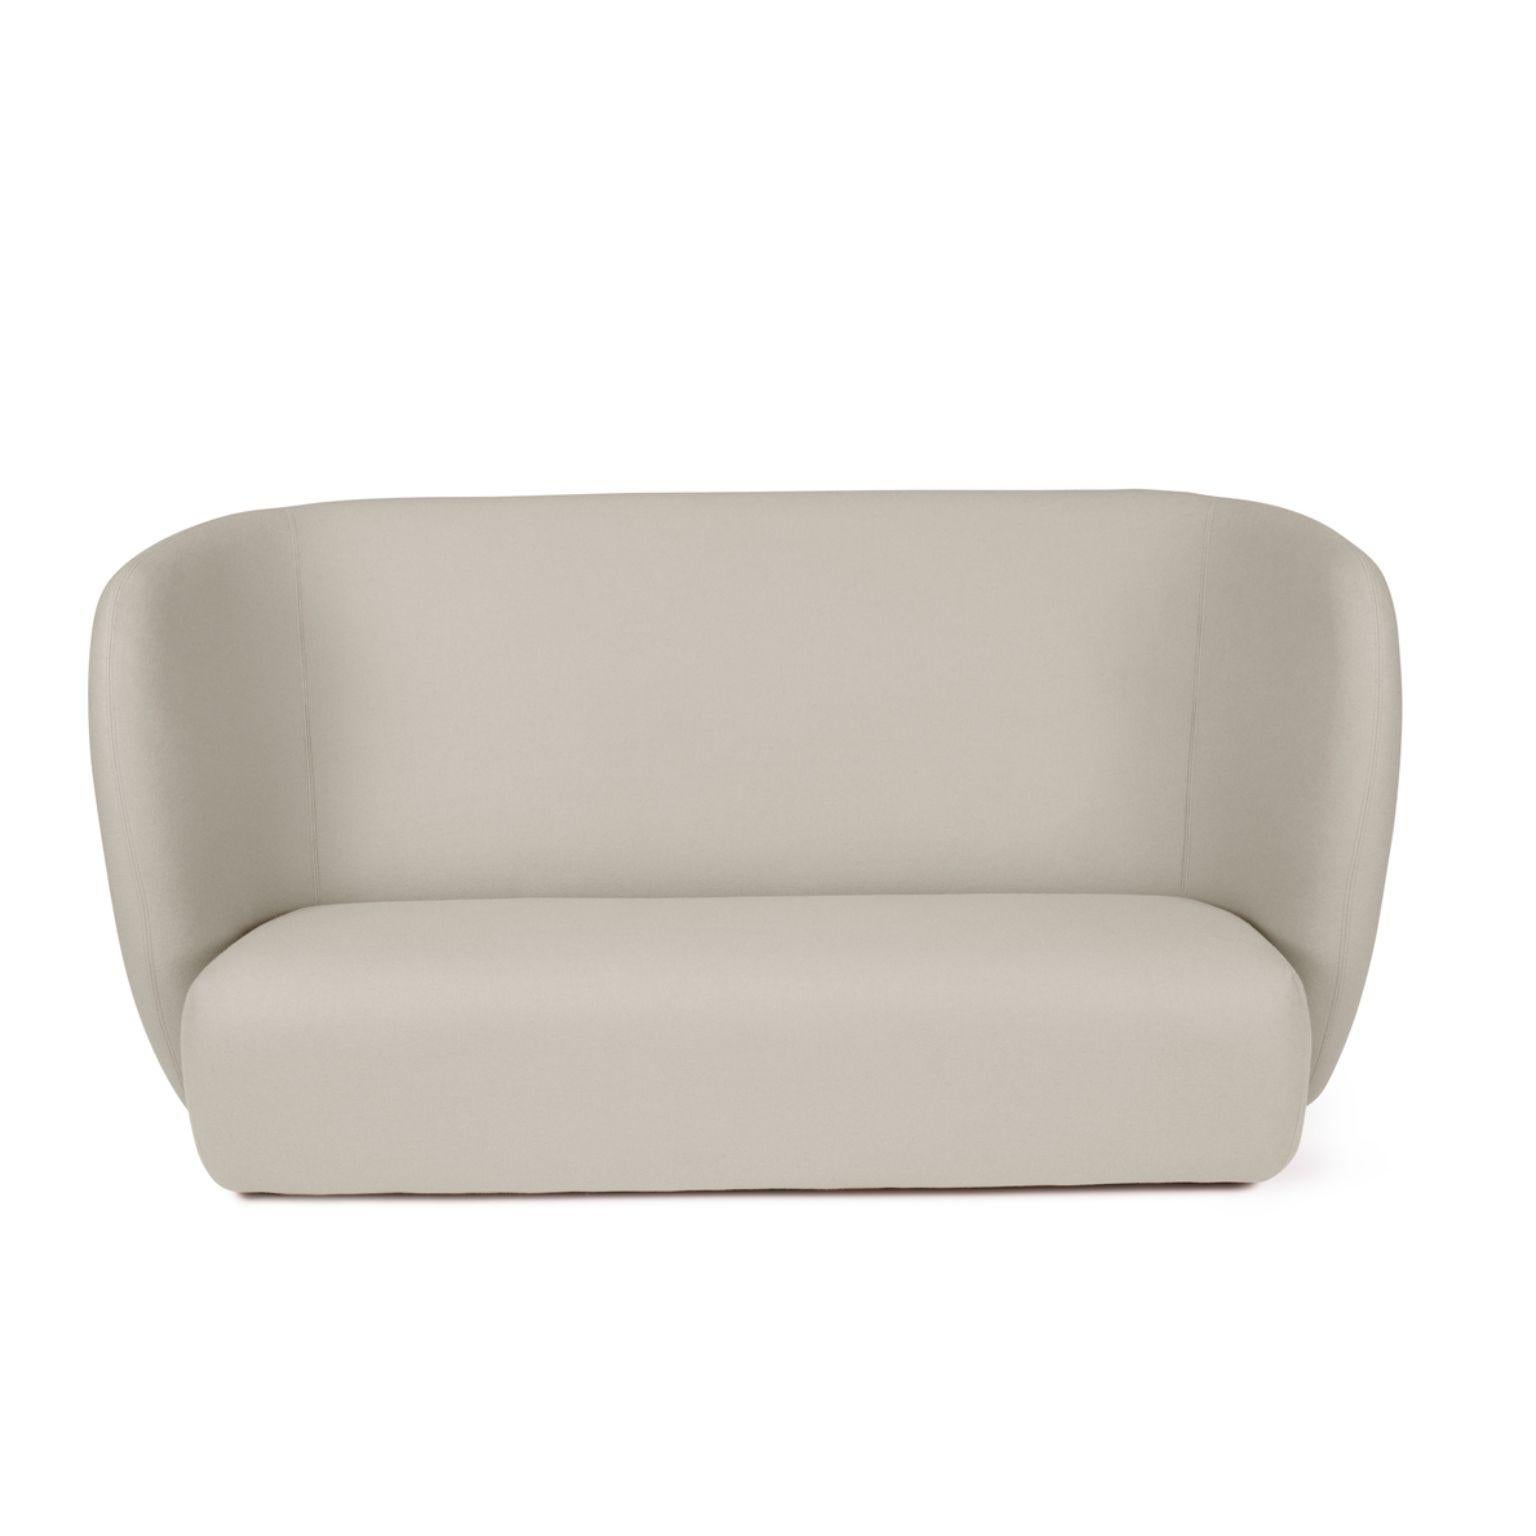 Haven 3 seater pearl grey by Warm Nordic
Dimensions: D 220 x W 84 x H 110/40 cm
Material: Textile upholstery, foam, spring system, wood
Weight: 84 kg
Also available in different colours and finishes.

Haven is a contemporary sofa with a